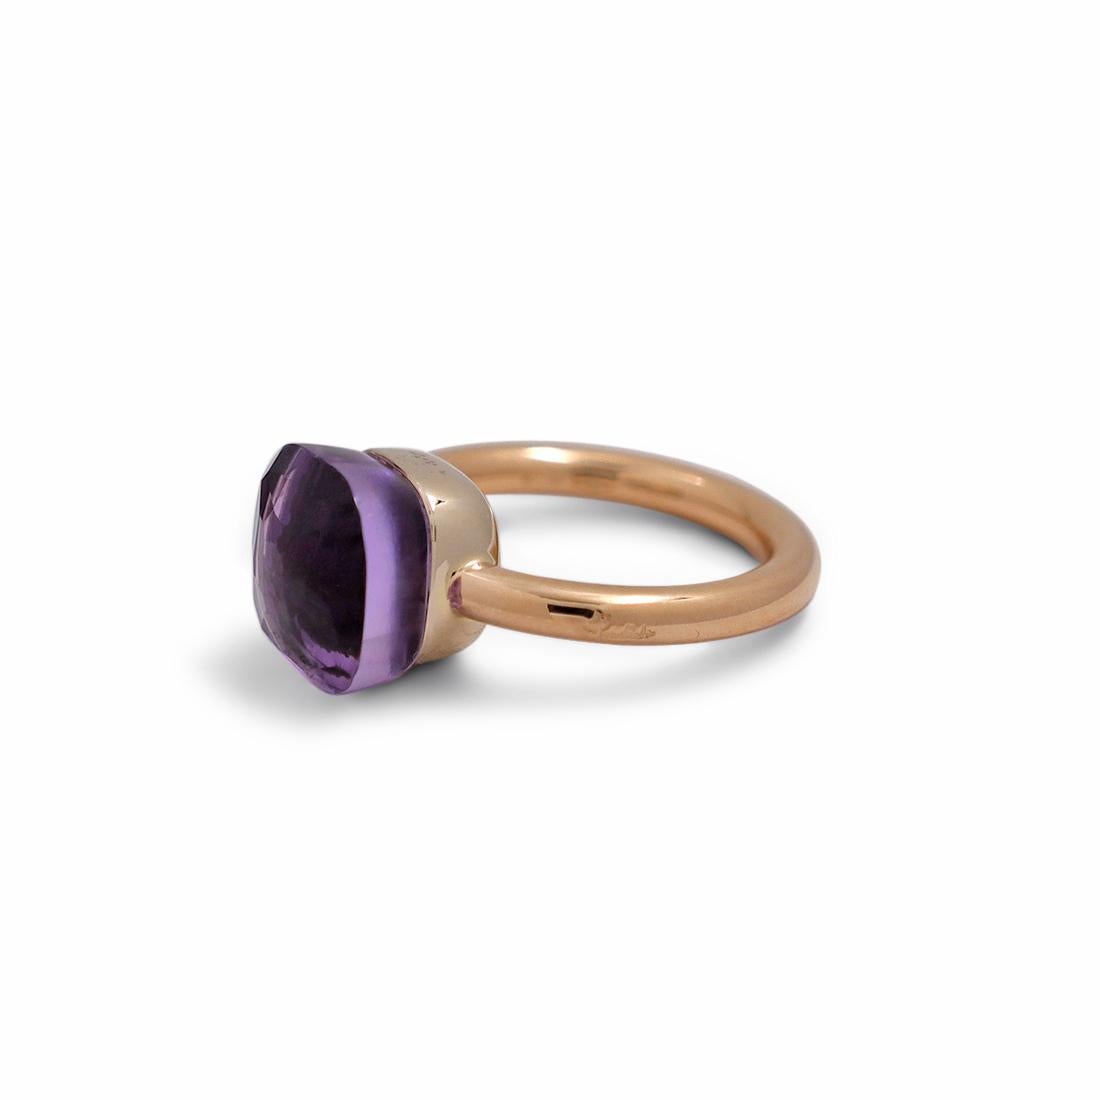 Authentic Pomellato Nudo ring crafted in 18 karat rose gold and featuring a faceted Amethyst stone measuring 10.4mm x 10.4mm. Signed Pomellato. Ring size 5 1/4 US or 50 EU. Not presented with original box or papers. CIRCA 2010s

Brand: